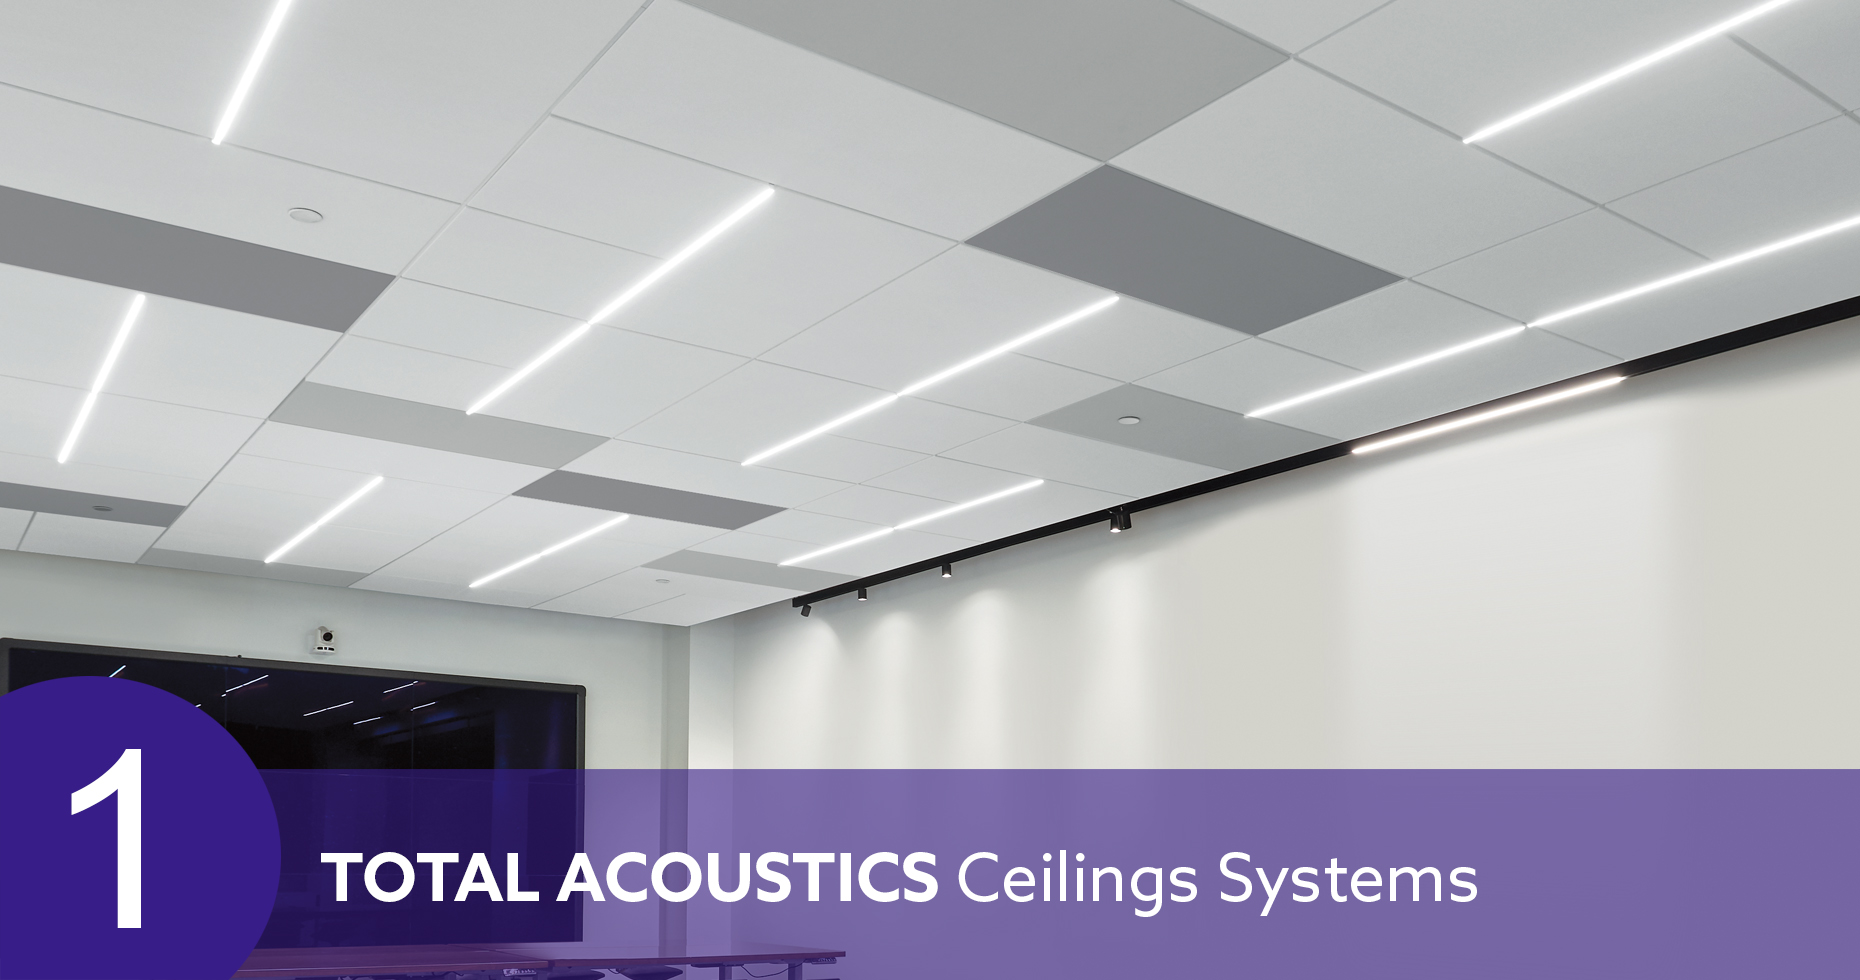 TOTAL ACOUSTICS Ceiling Systems